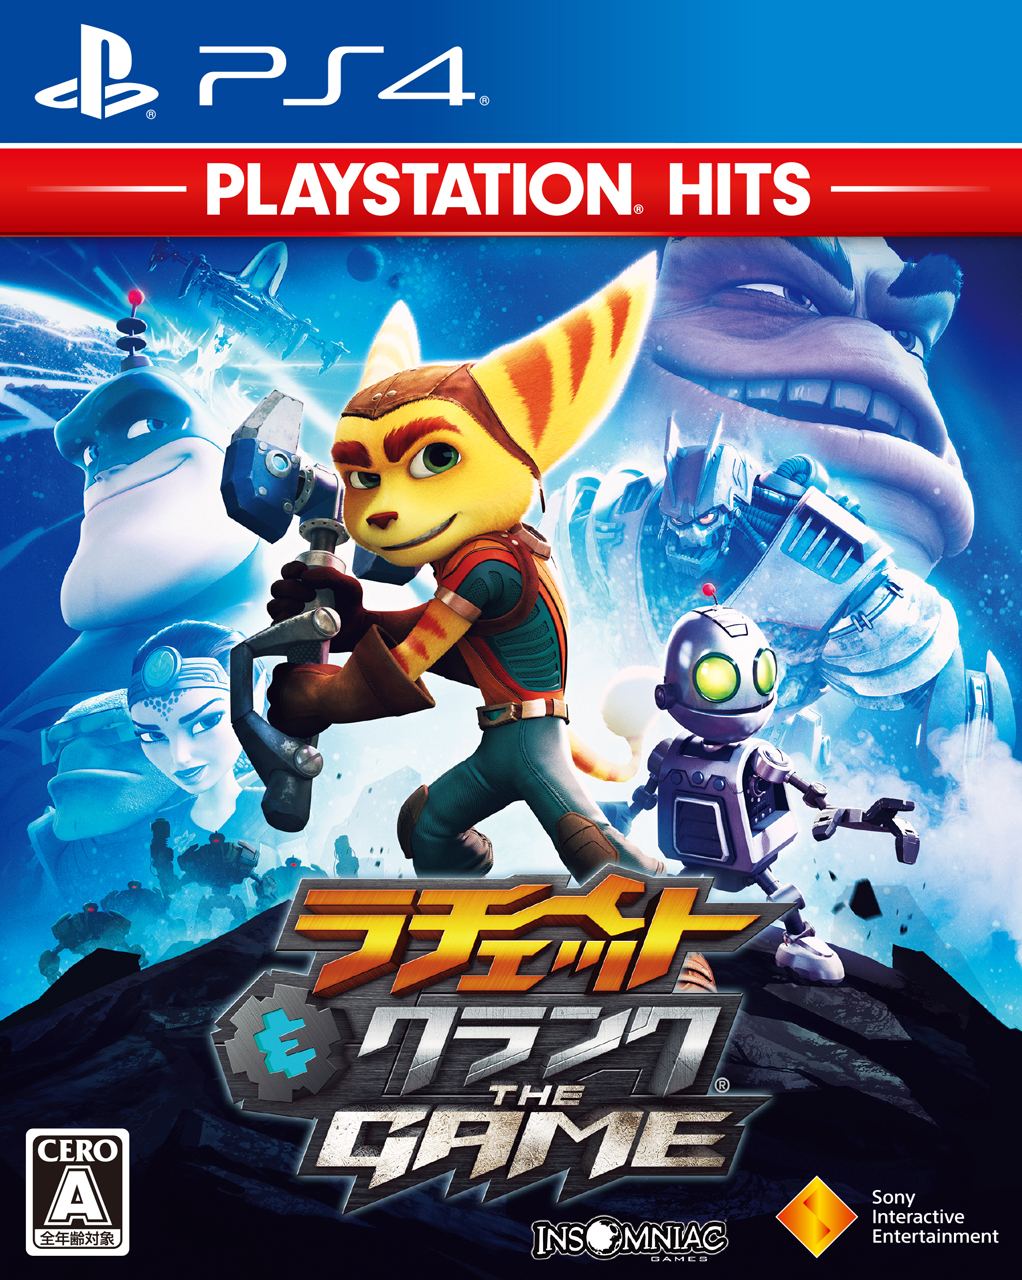 Ratchet & Clank: The Hits) for PlayStation 4